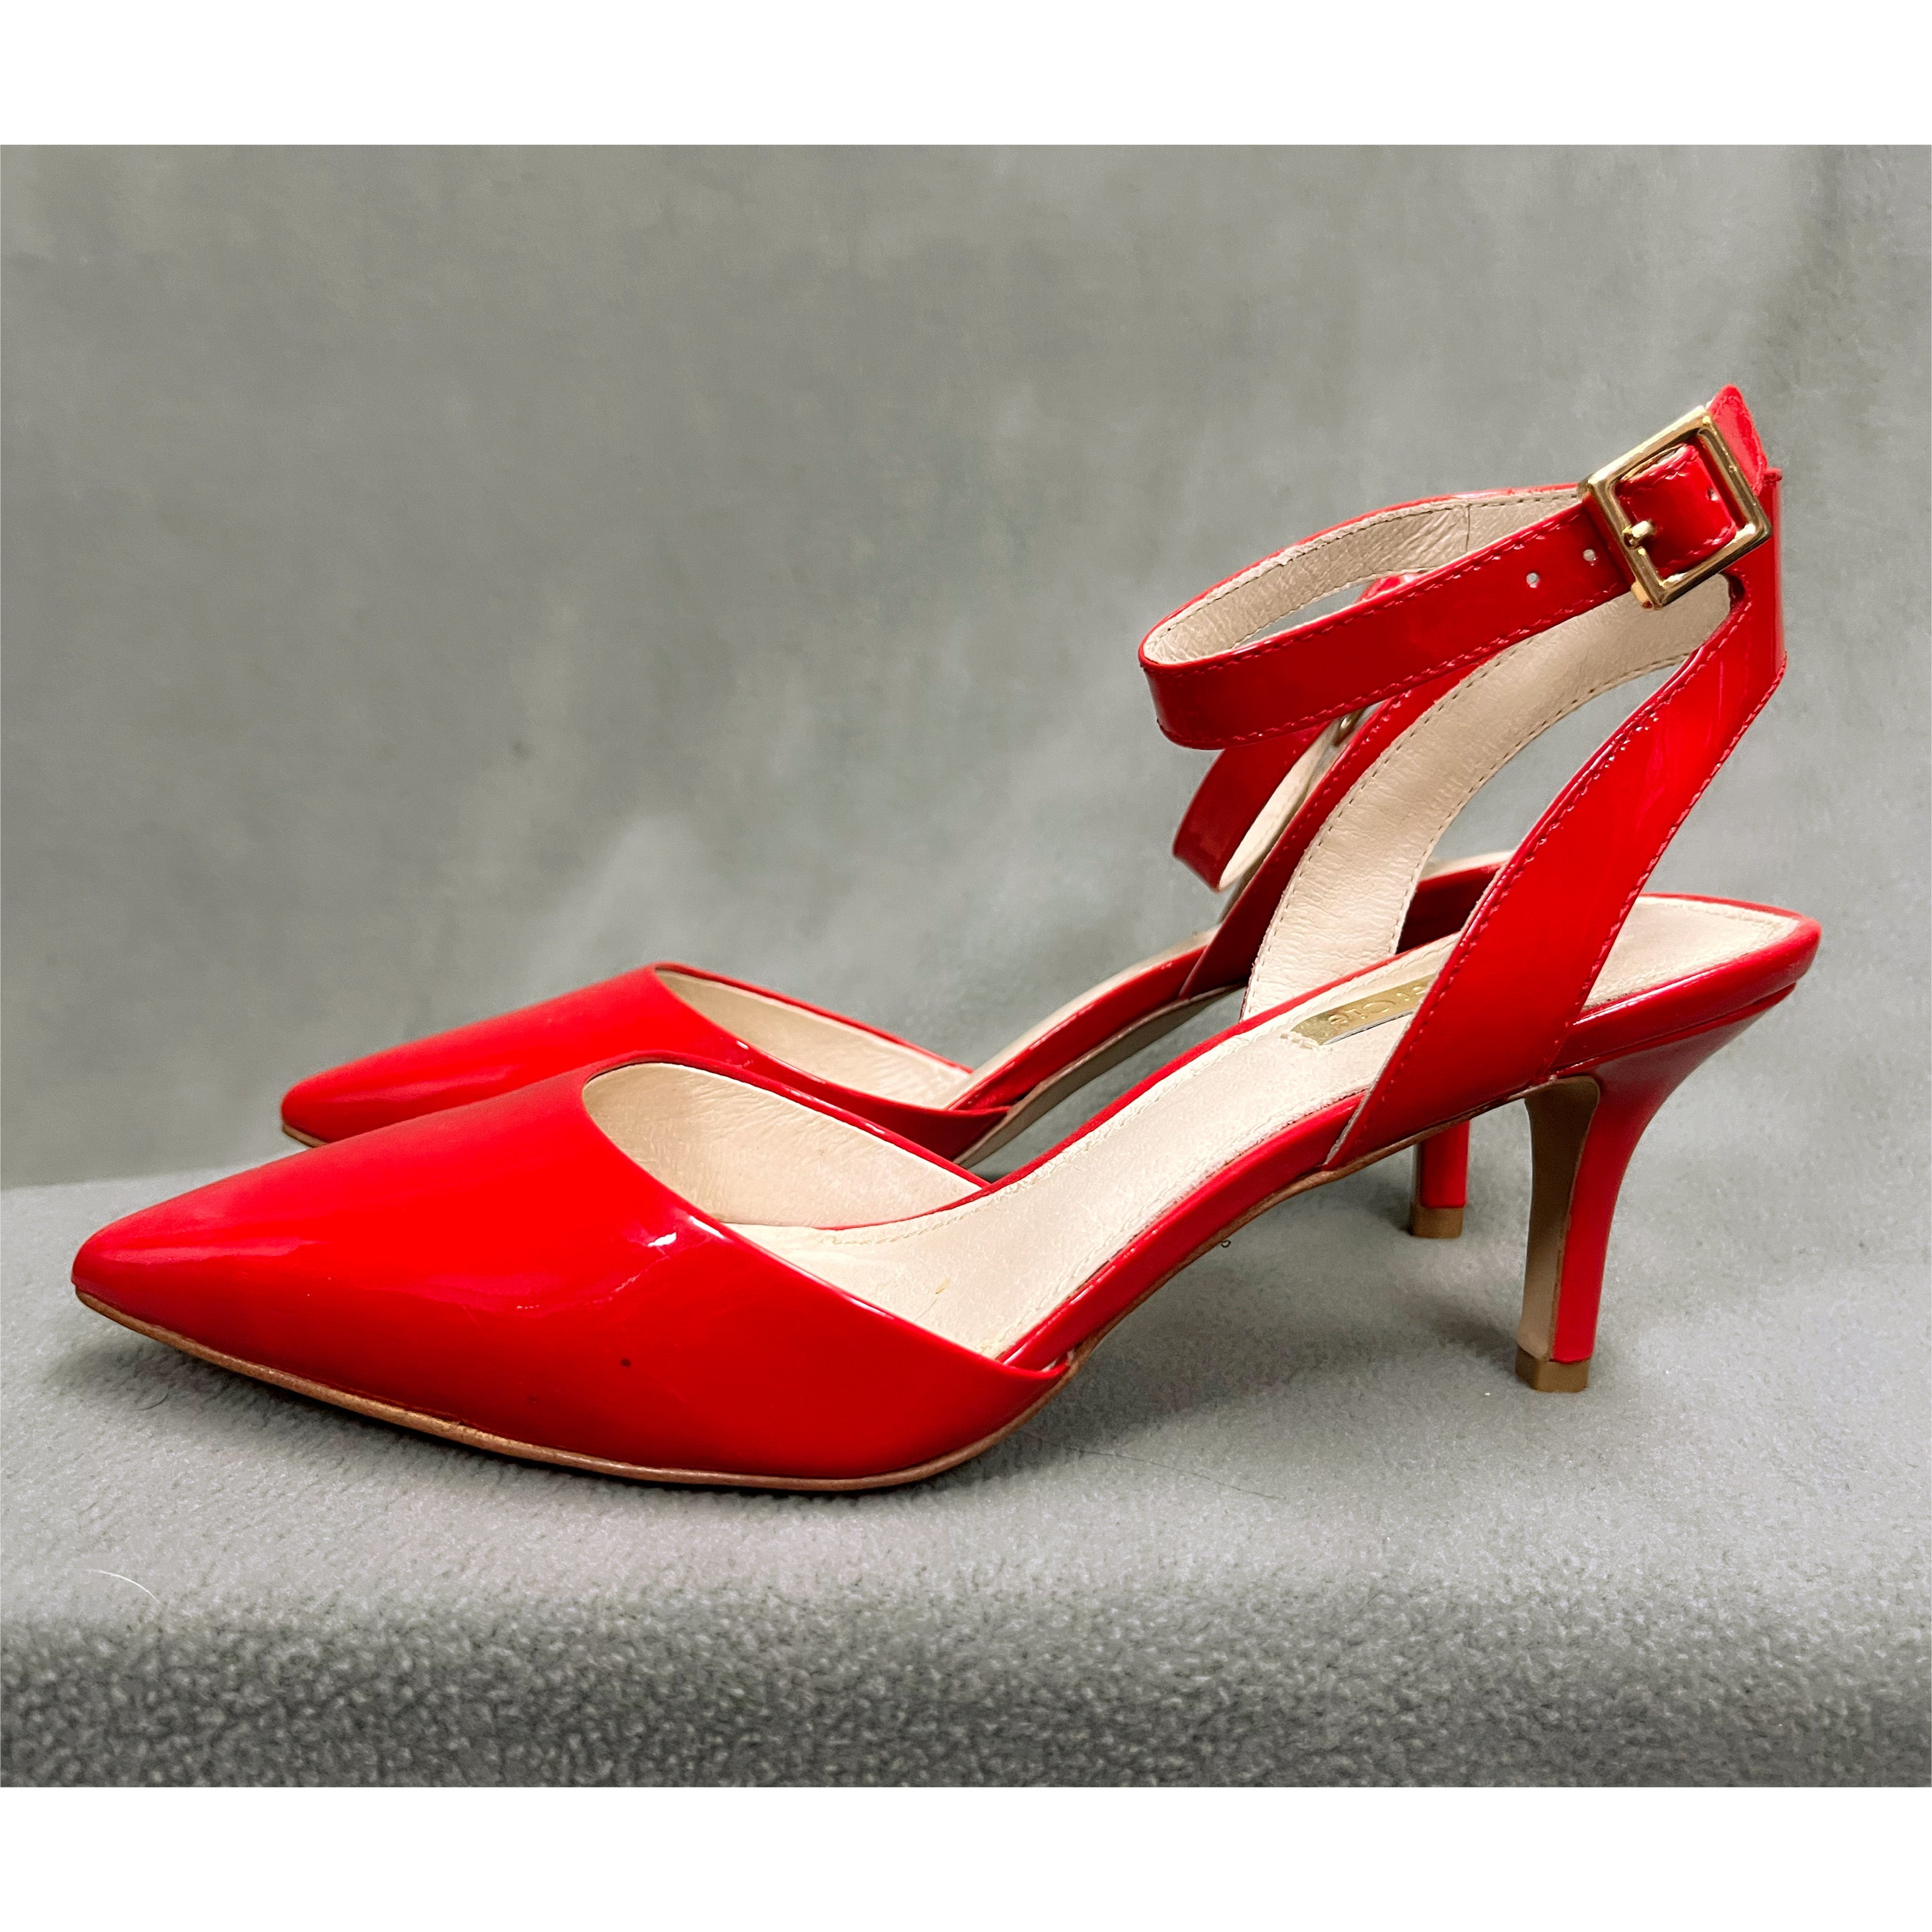 Louise & Cie red patent heel, size 8, NEW without tags